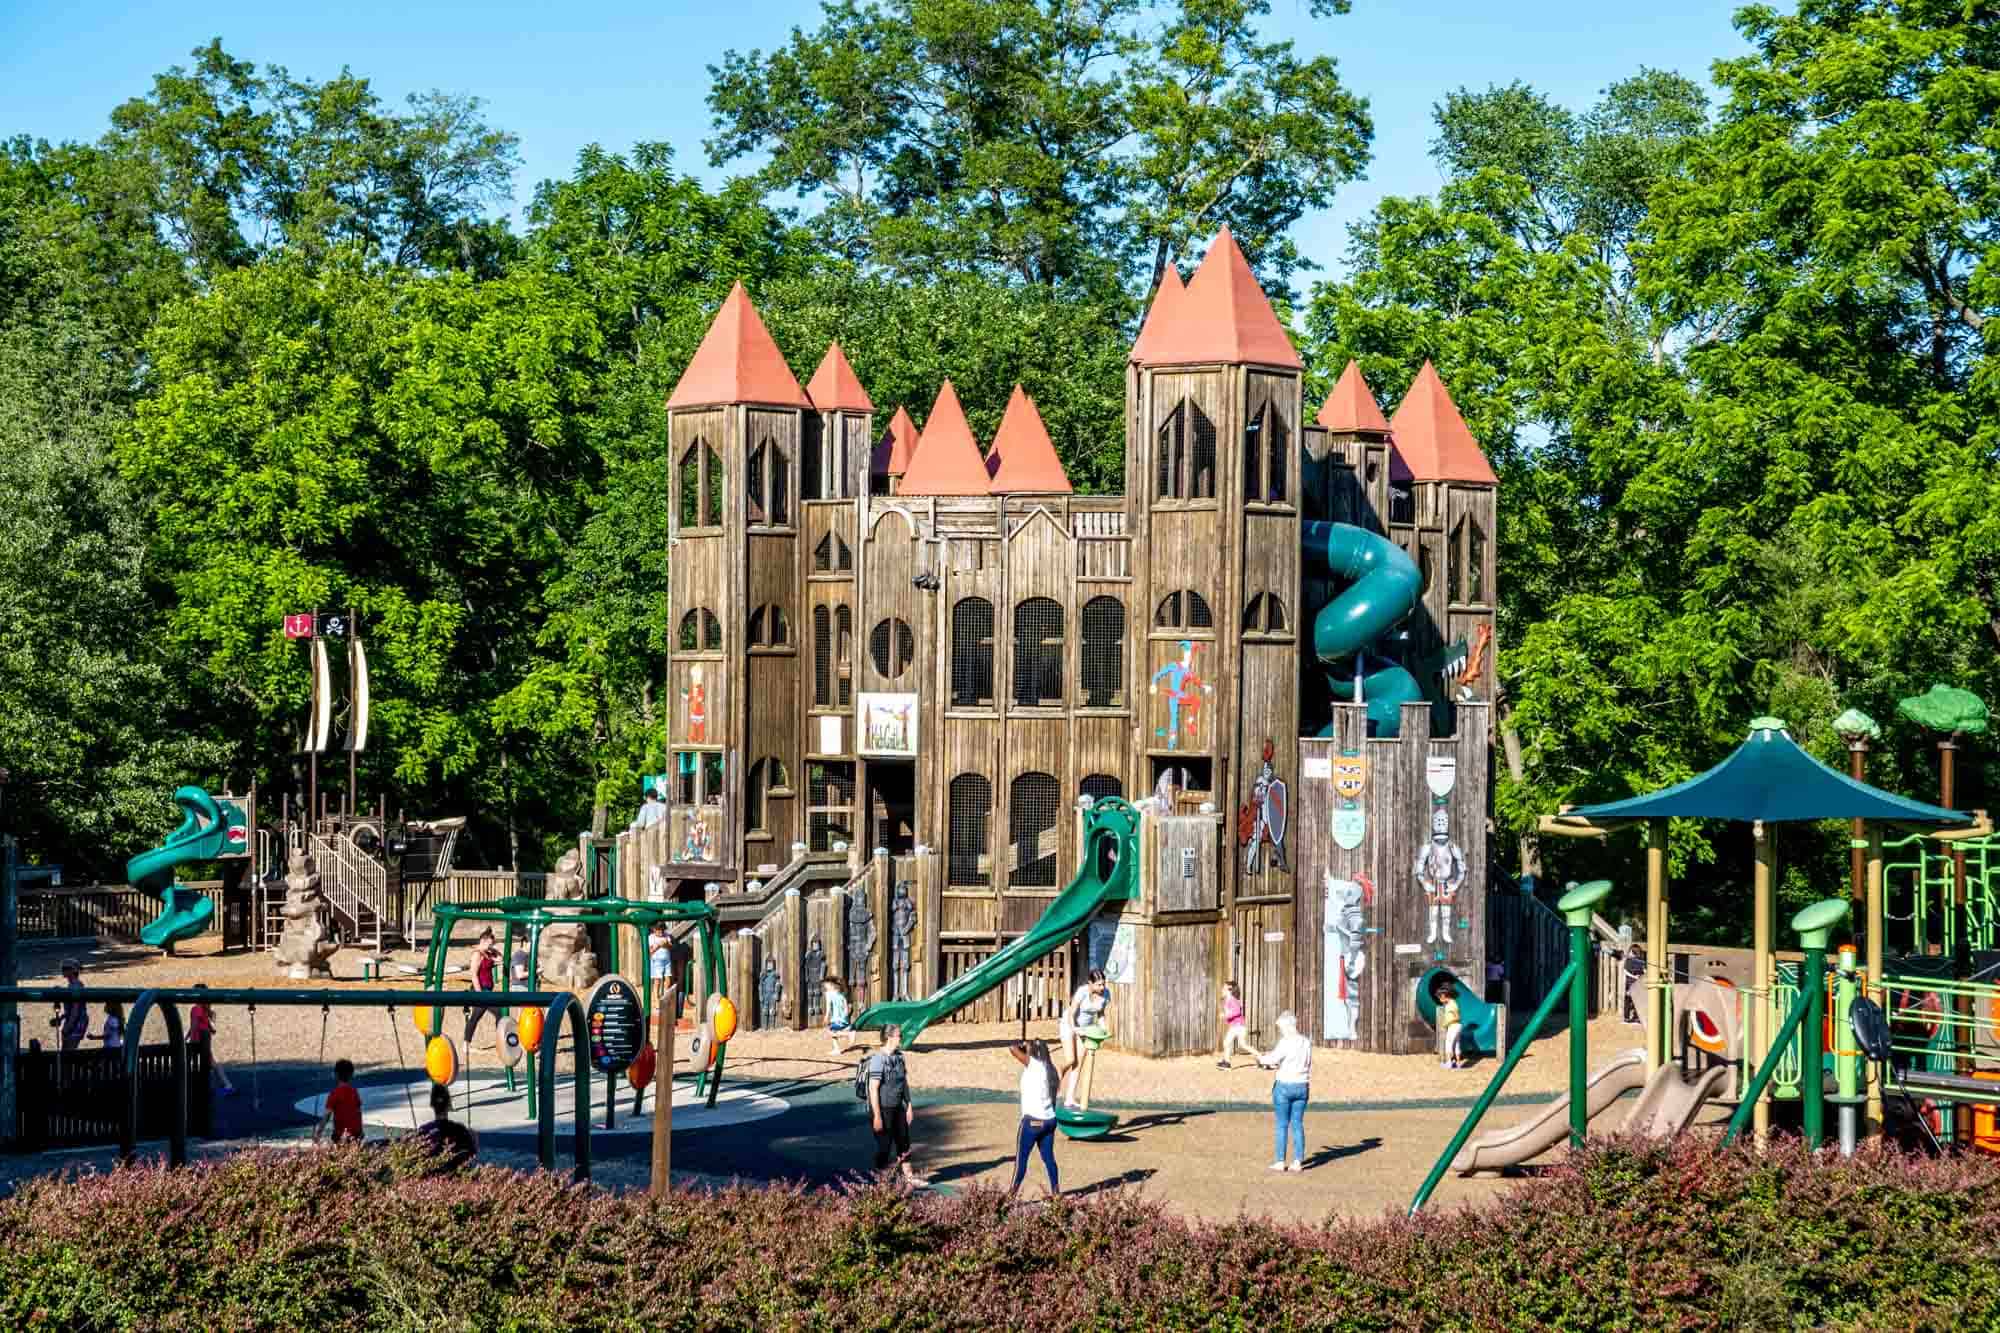 Wooden play structure shaped like a castle